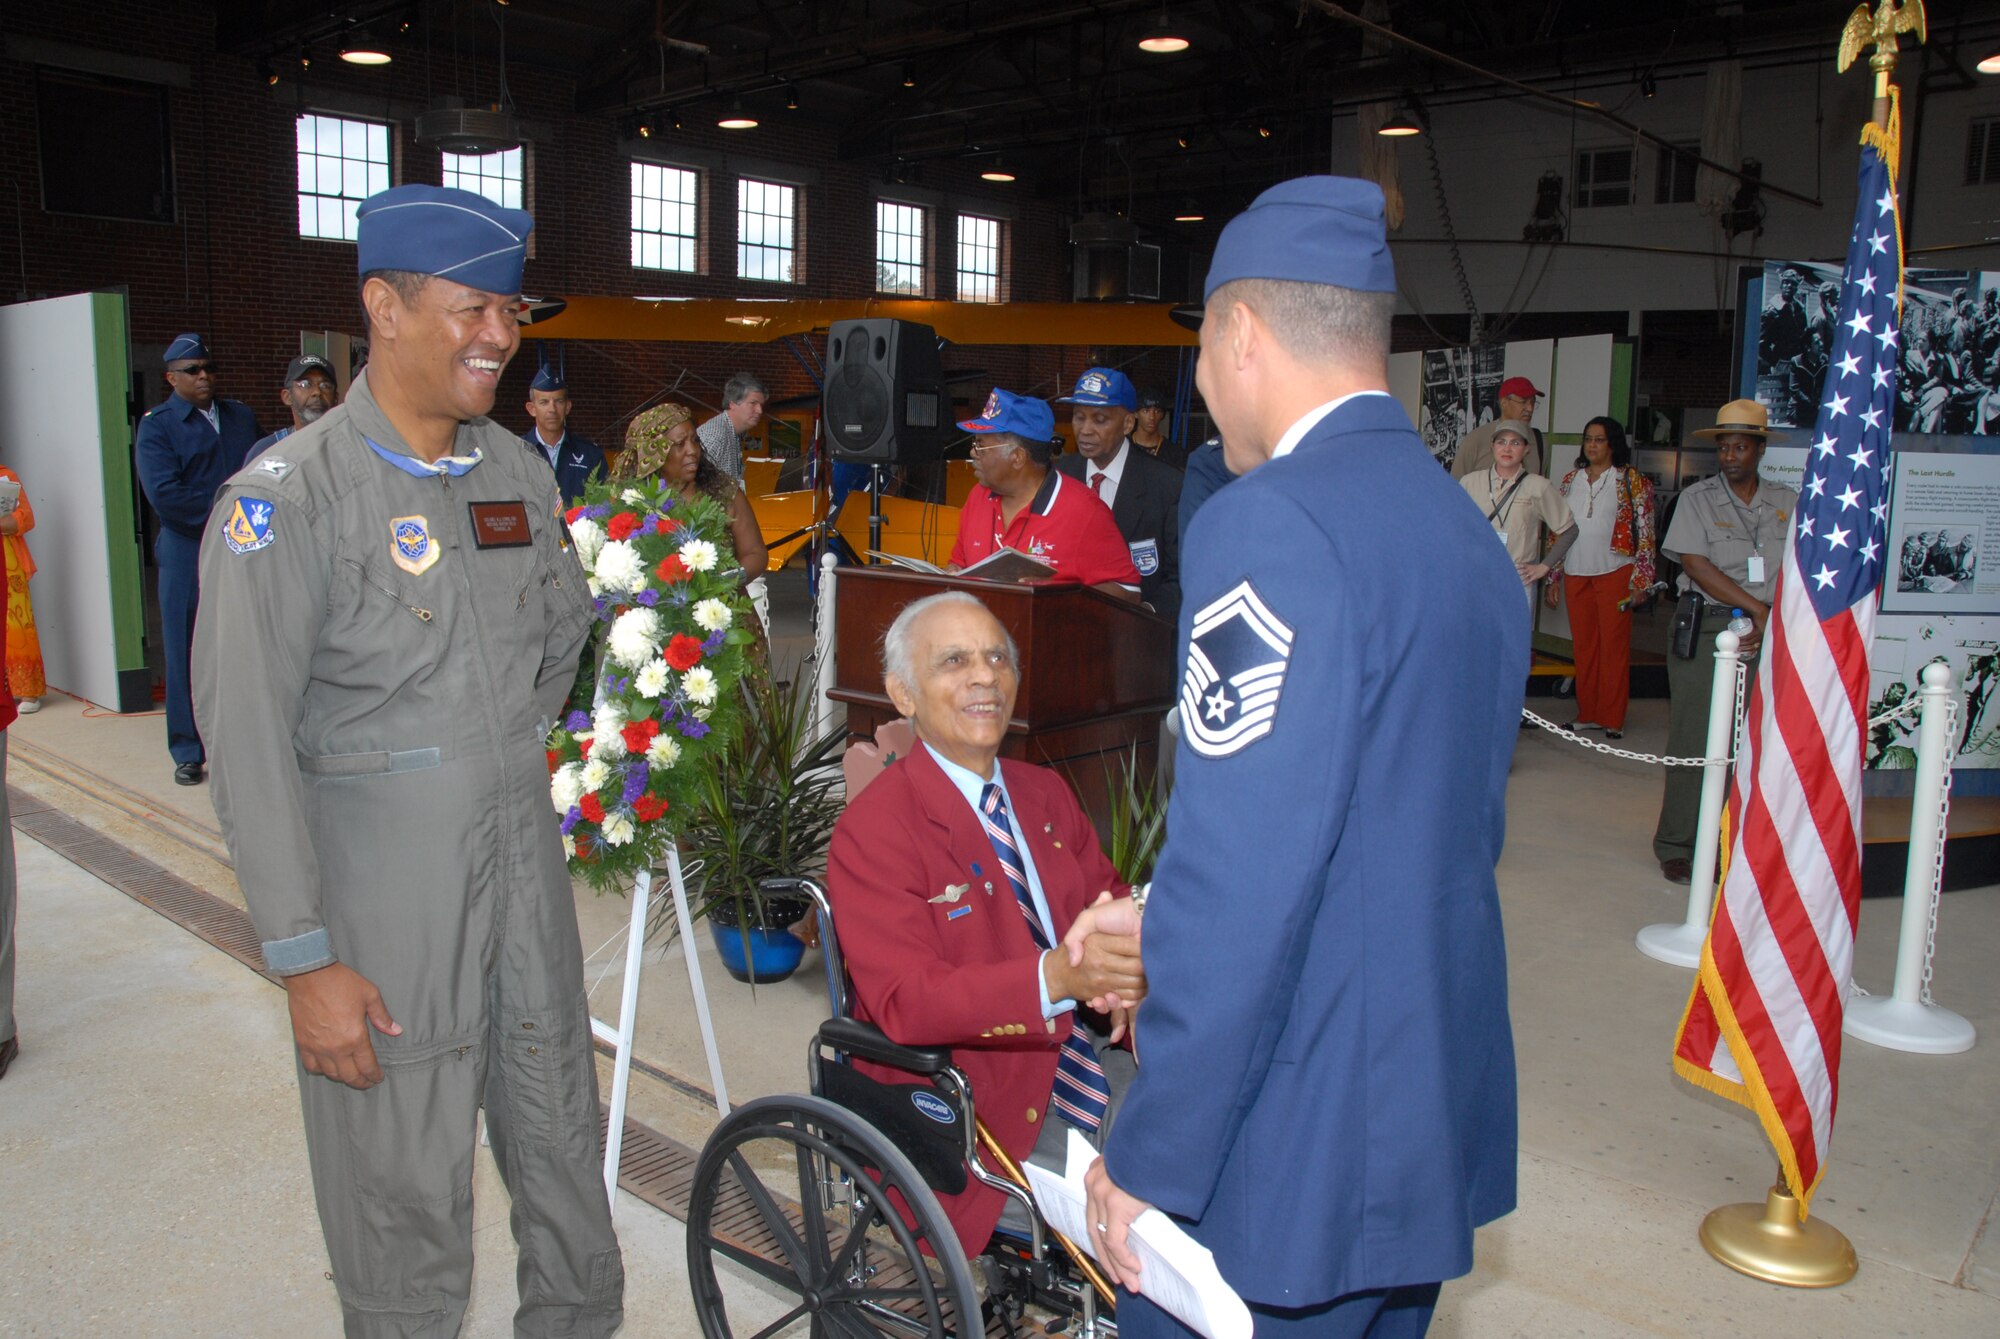 Retired Lt. Col. Herbert E. Carter, accompanied by retired Col. R.J. Lewis,  shakes hands with Senior Master Sgt. Mark Lanton after administering the oath of enlistment to Sergeant Lanton and 10 908th Airlift Wing people who either enlisted or re-enlisted Oct. 11 at Moton Field in Tuskegee, Ala. Colonel Carter, an original Tuskegee Airman, is a former commander of the AFROTC detachment at Tuskegee, longtime university official as well as president of the Tuskegee chapter of Tuskegee Airmen Inc. He was on hand for the three-day grand opening of the Tuskegee Airmen National Historic Site. Colonel Lewis, a second generation Tuskegee Airman, is the airfield manager at Moton Field.  (U.S. Air Force Photo by Lt. Col. Jerry Lobb)         